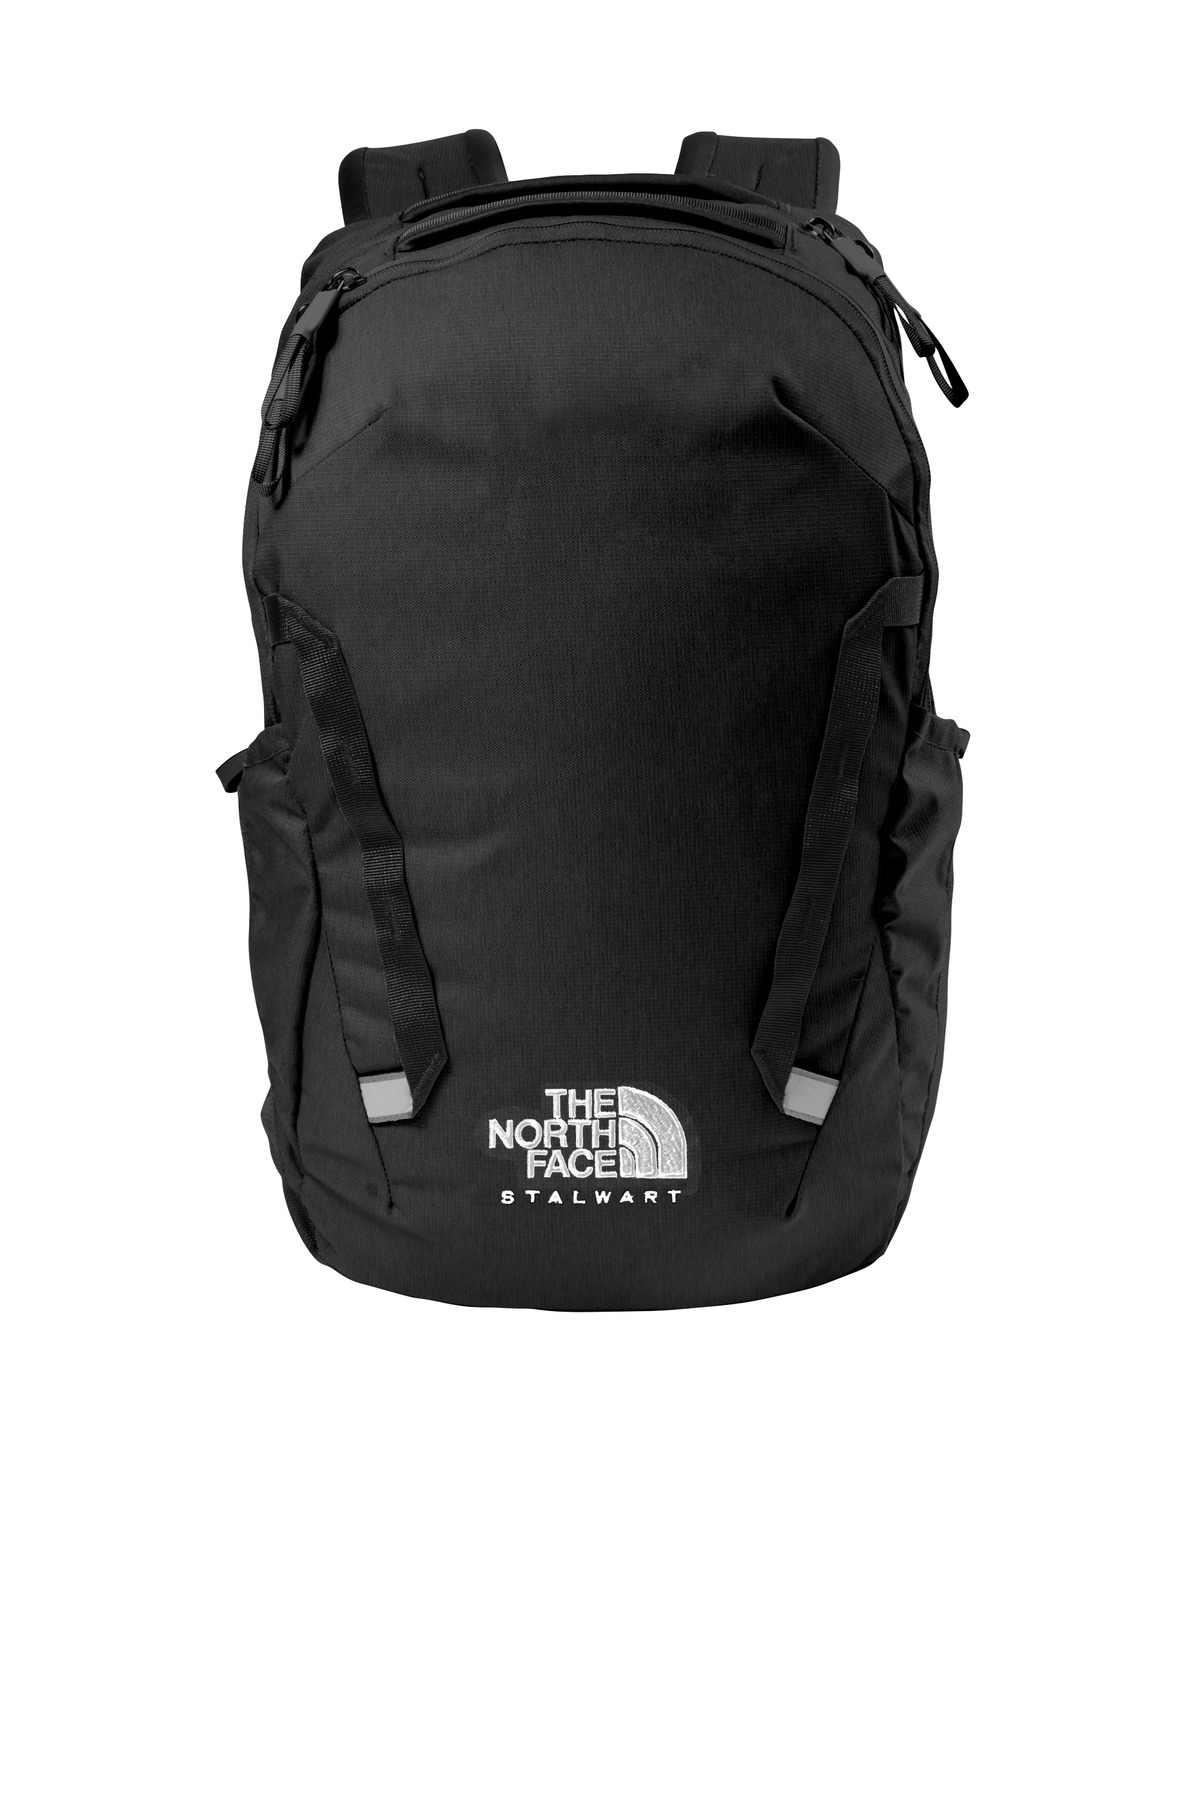 The North Face Stalwart Backpack-